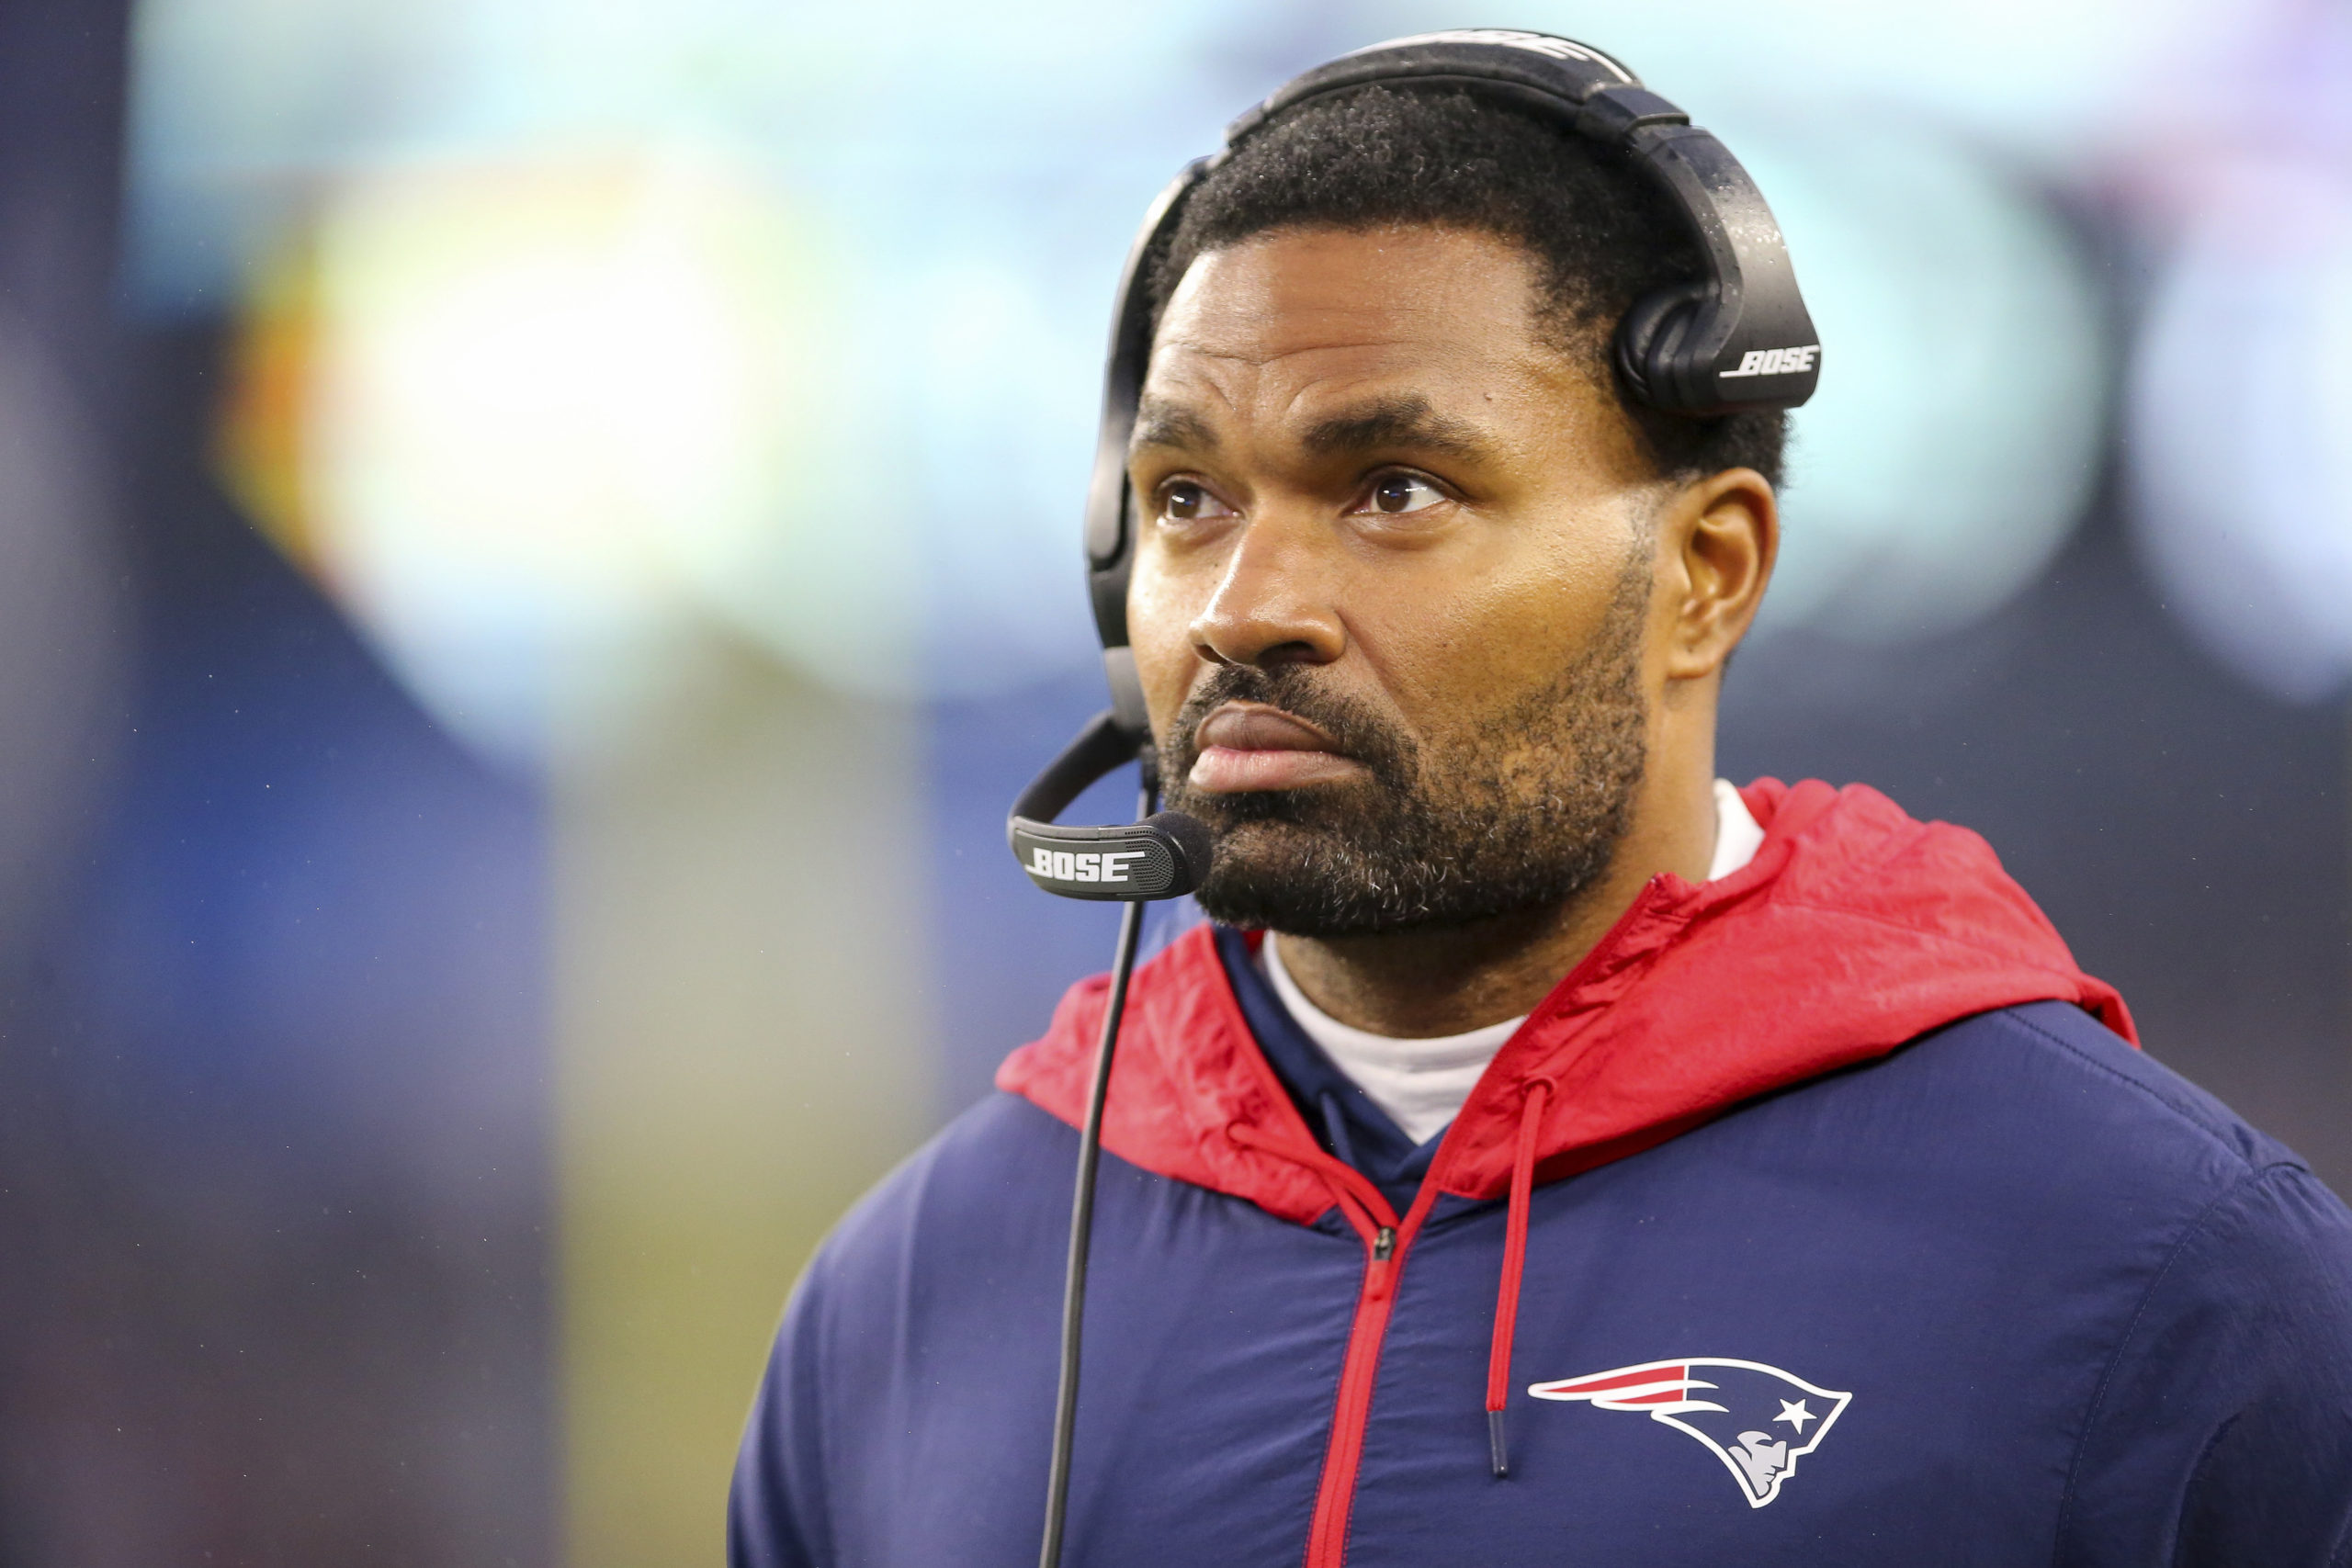 New England Patriots assistant coach Jerod Mayo watches from the sideline during a game against the Jacksonville Jaguars on Jan. 2, 2022, in Foxborough, Massachusetts.